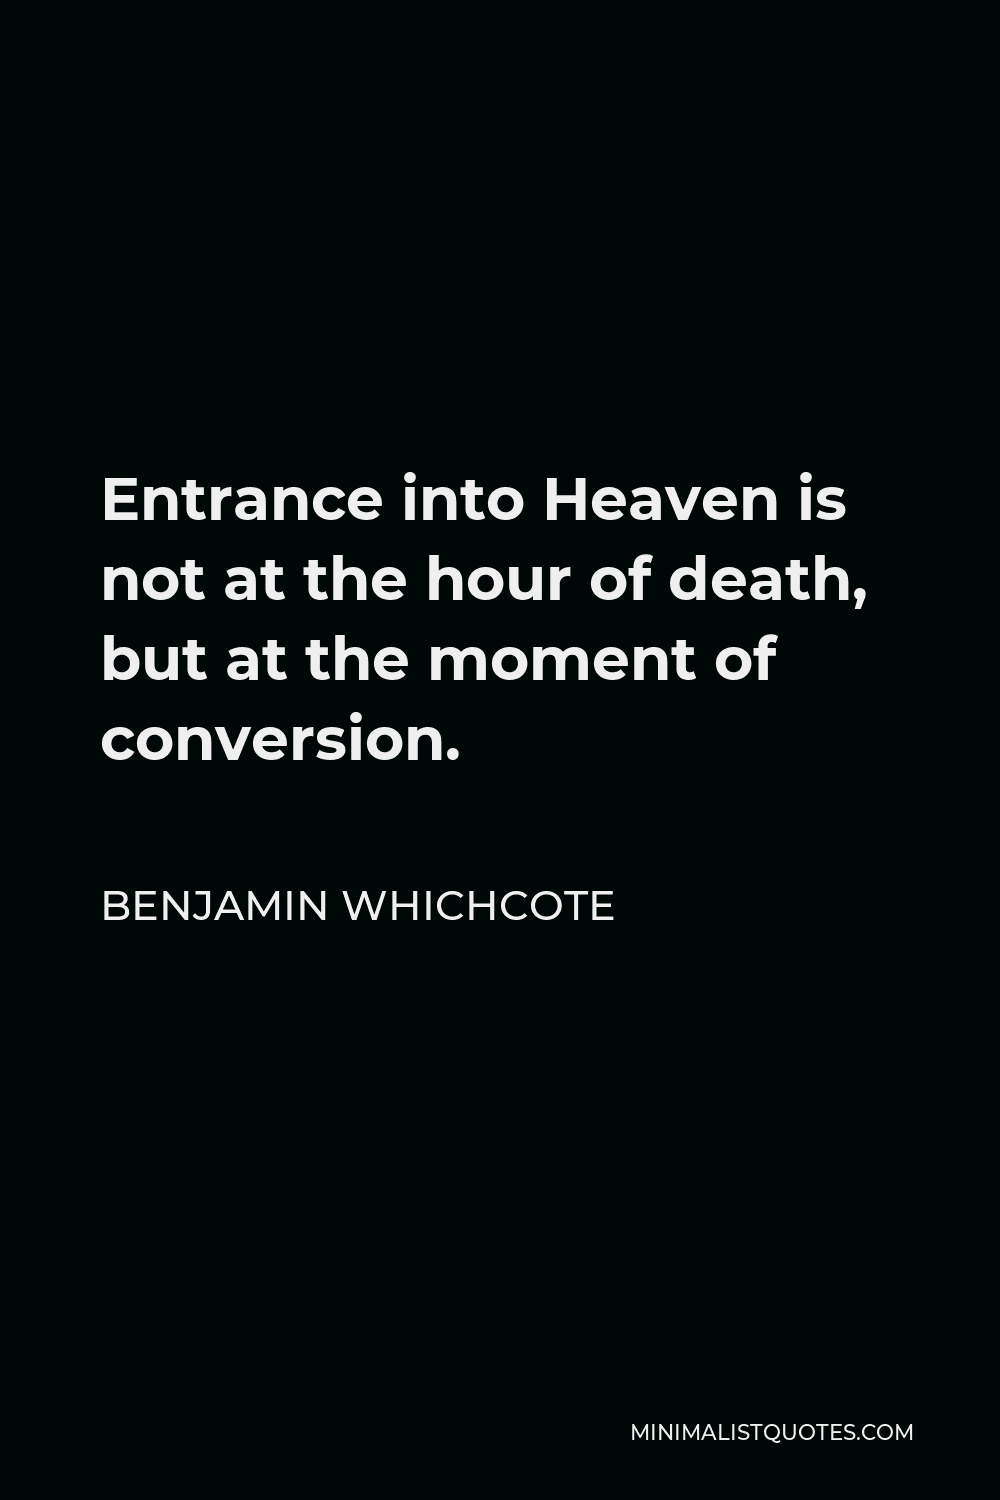 Benjamin Whichcote Quote - Entrance into Heaven is not at the hour of death, but at the moment of conversion.